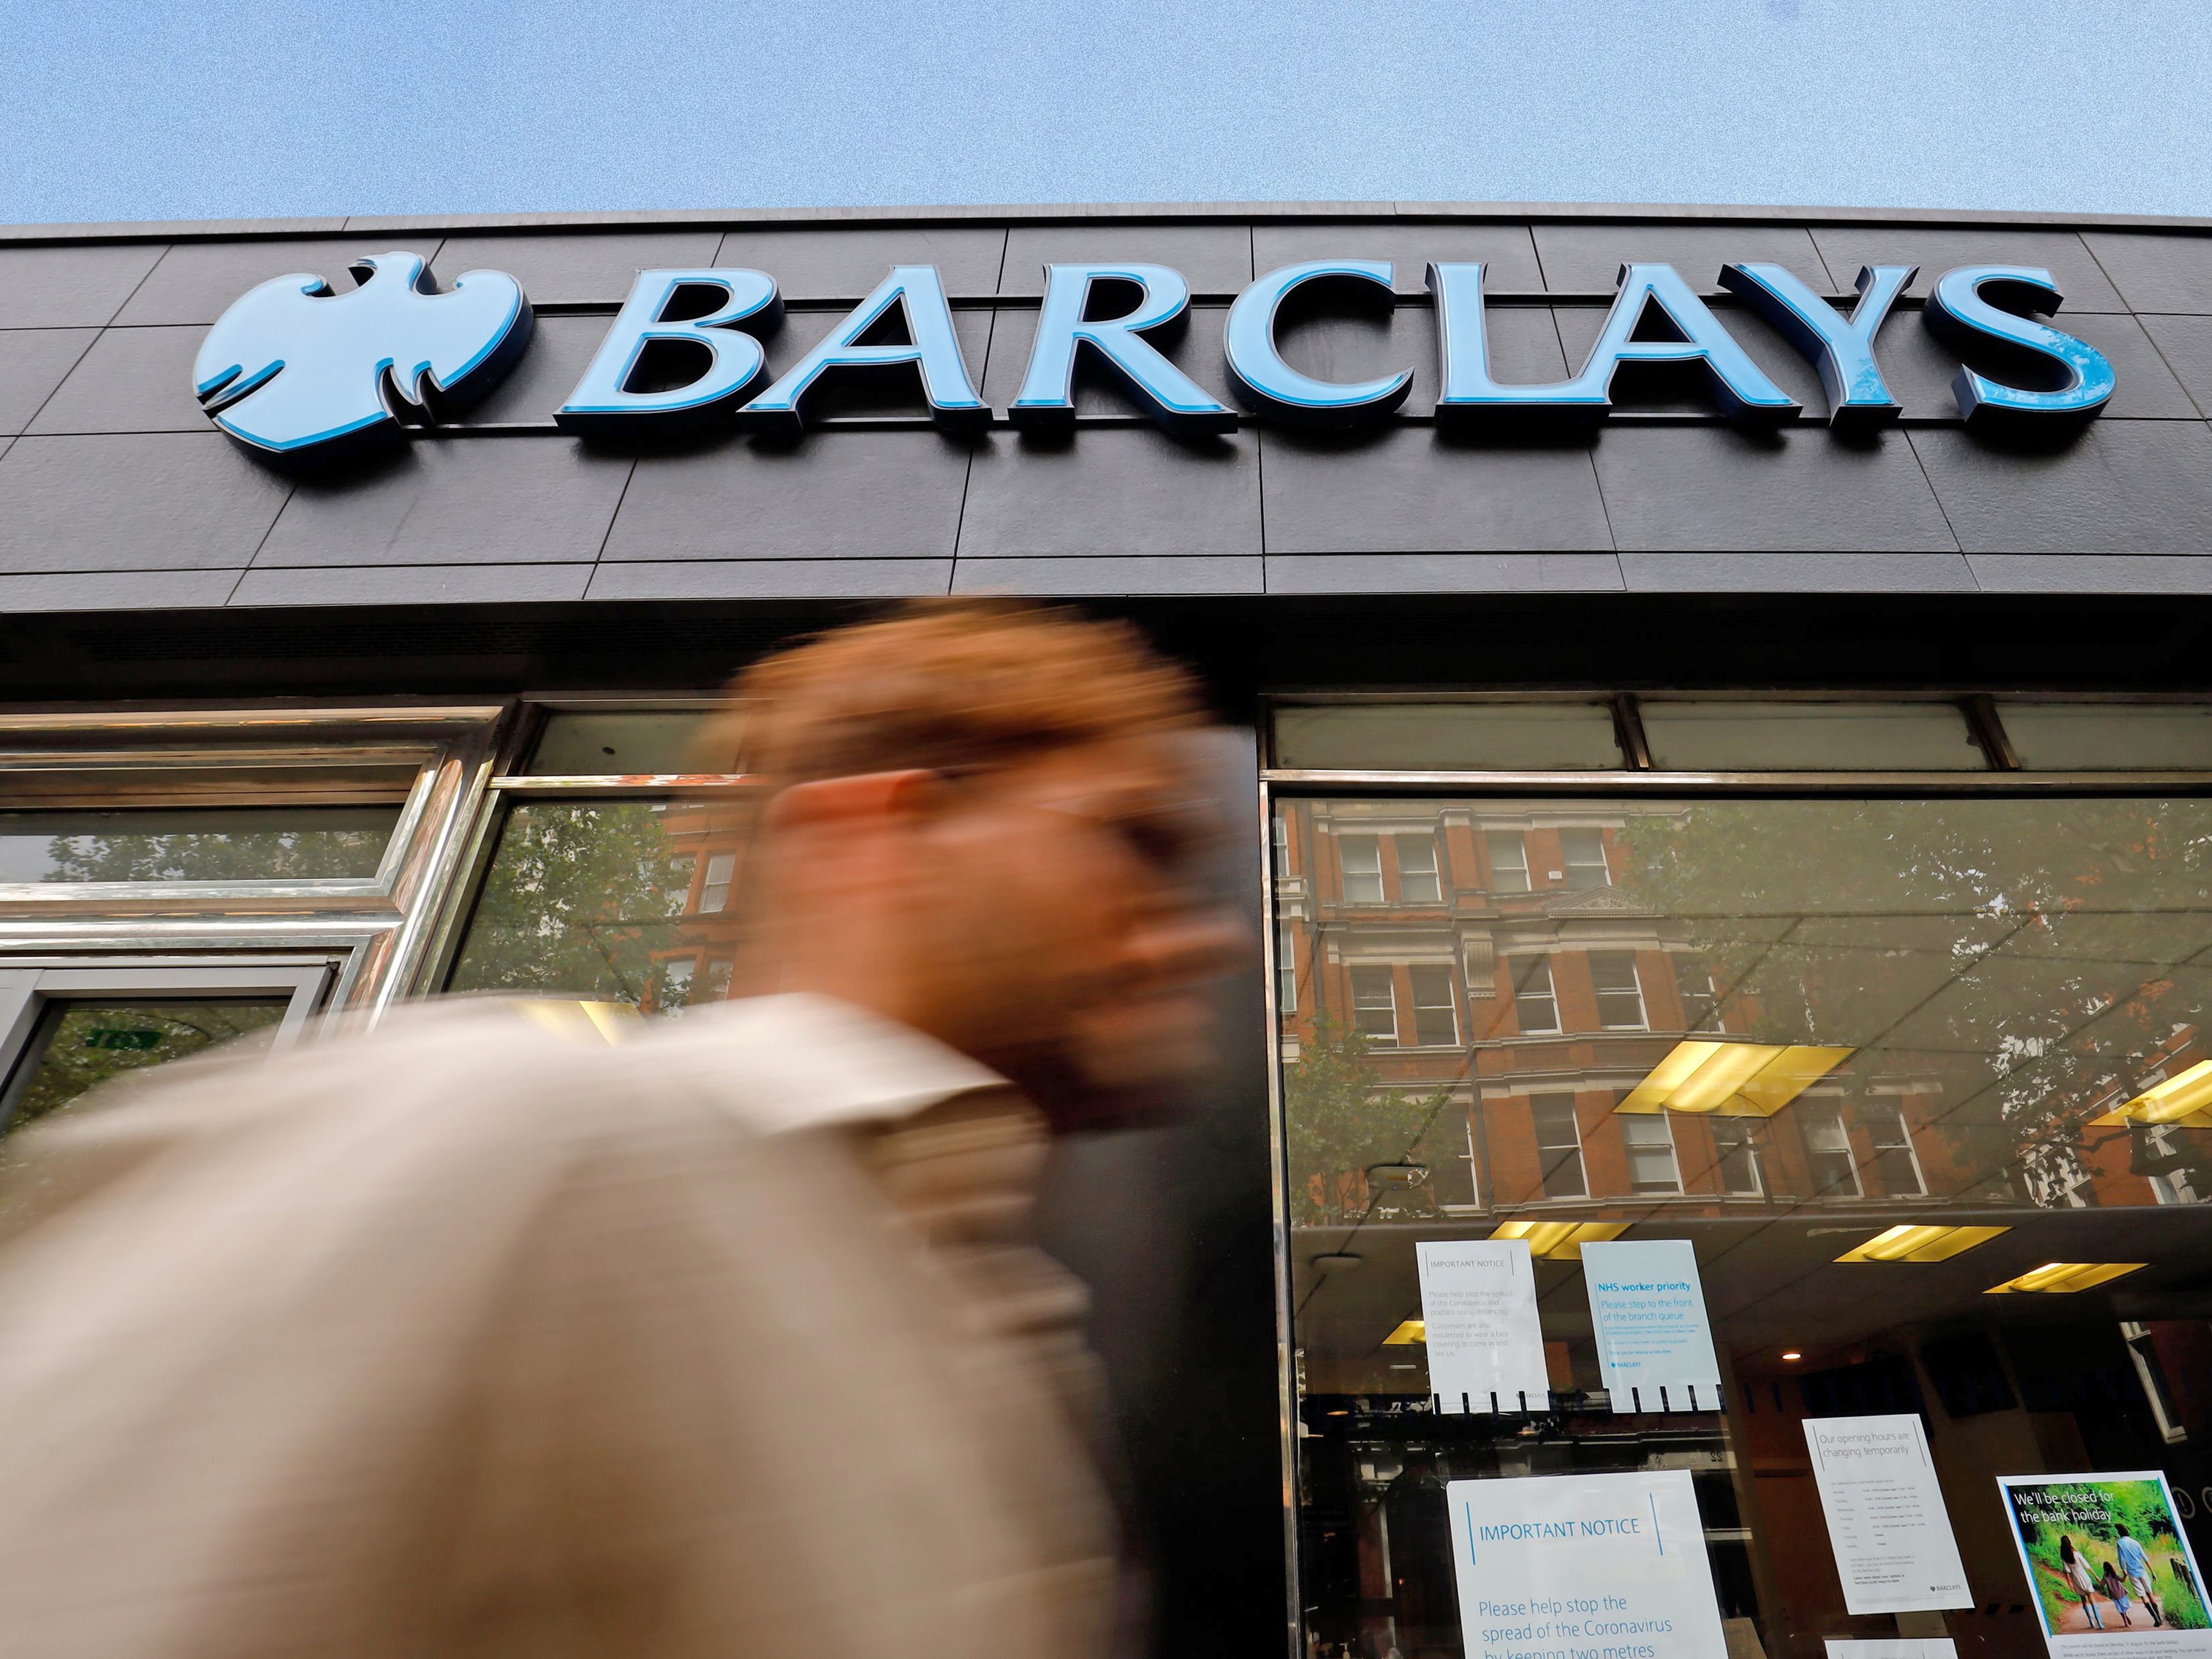 Barclays share price: logo and signage on the front of a building